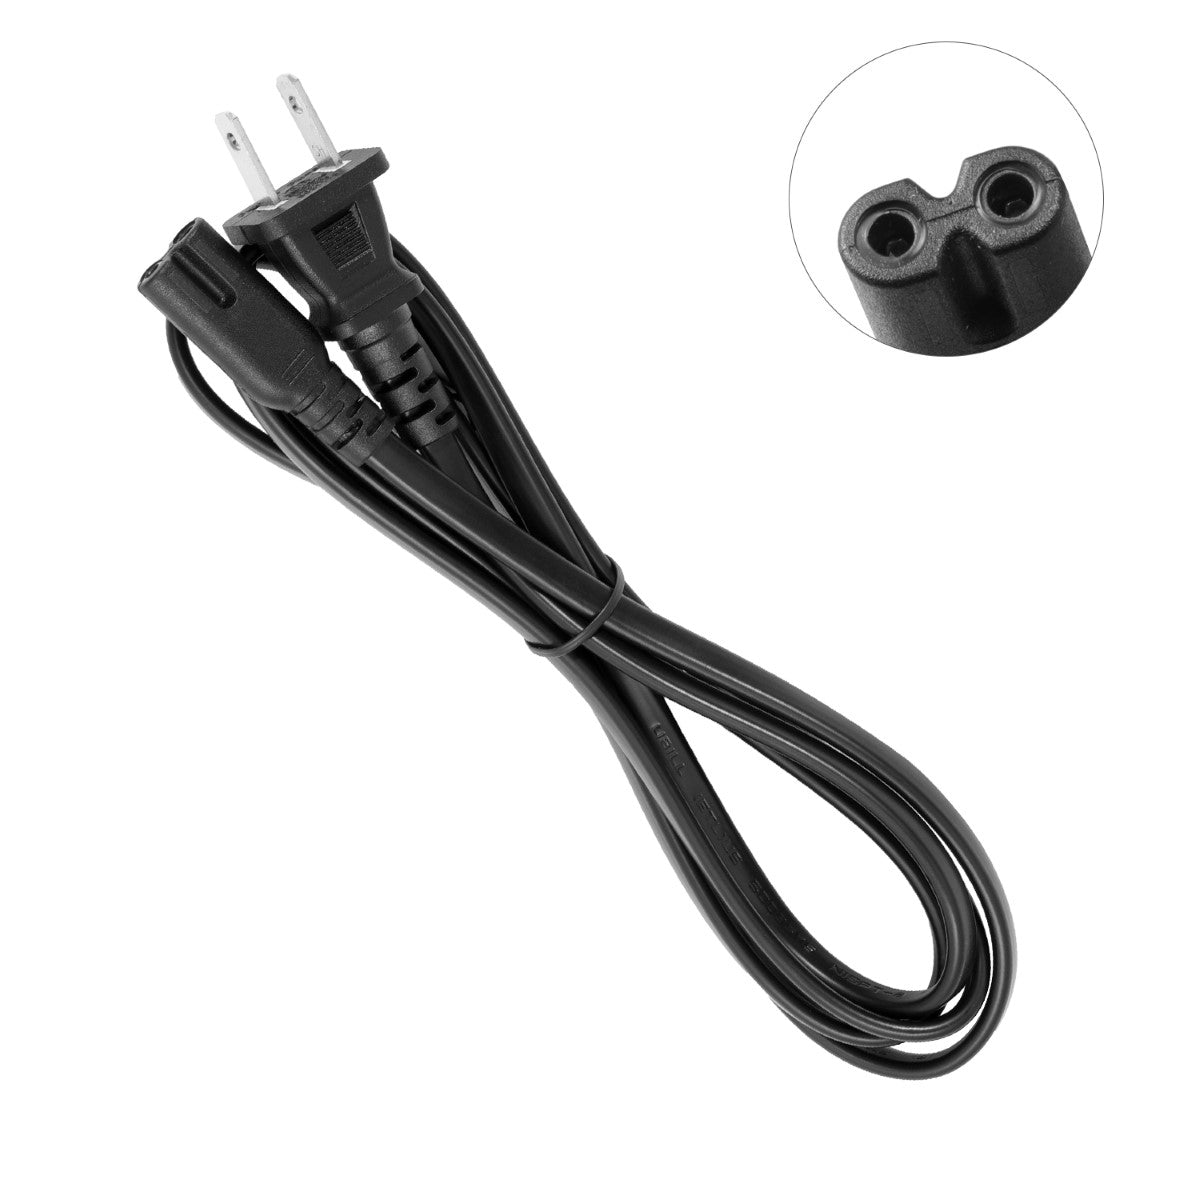 Power Cord for HP ENVY 110 D411 e-All-in-One Printer.